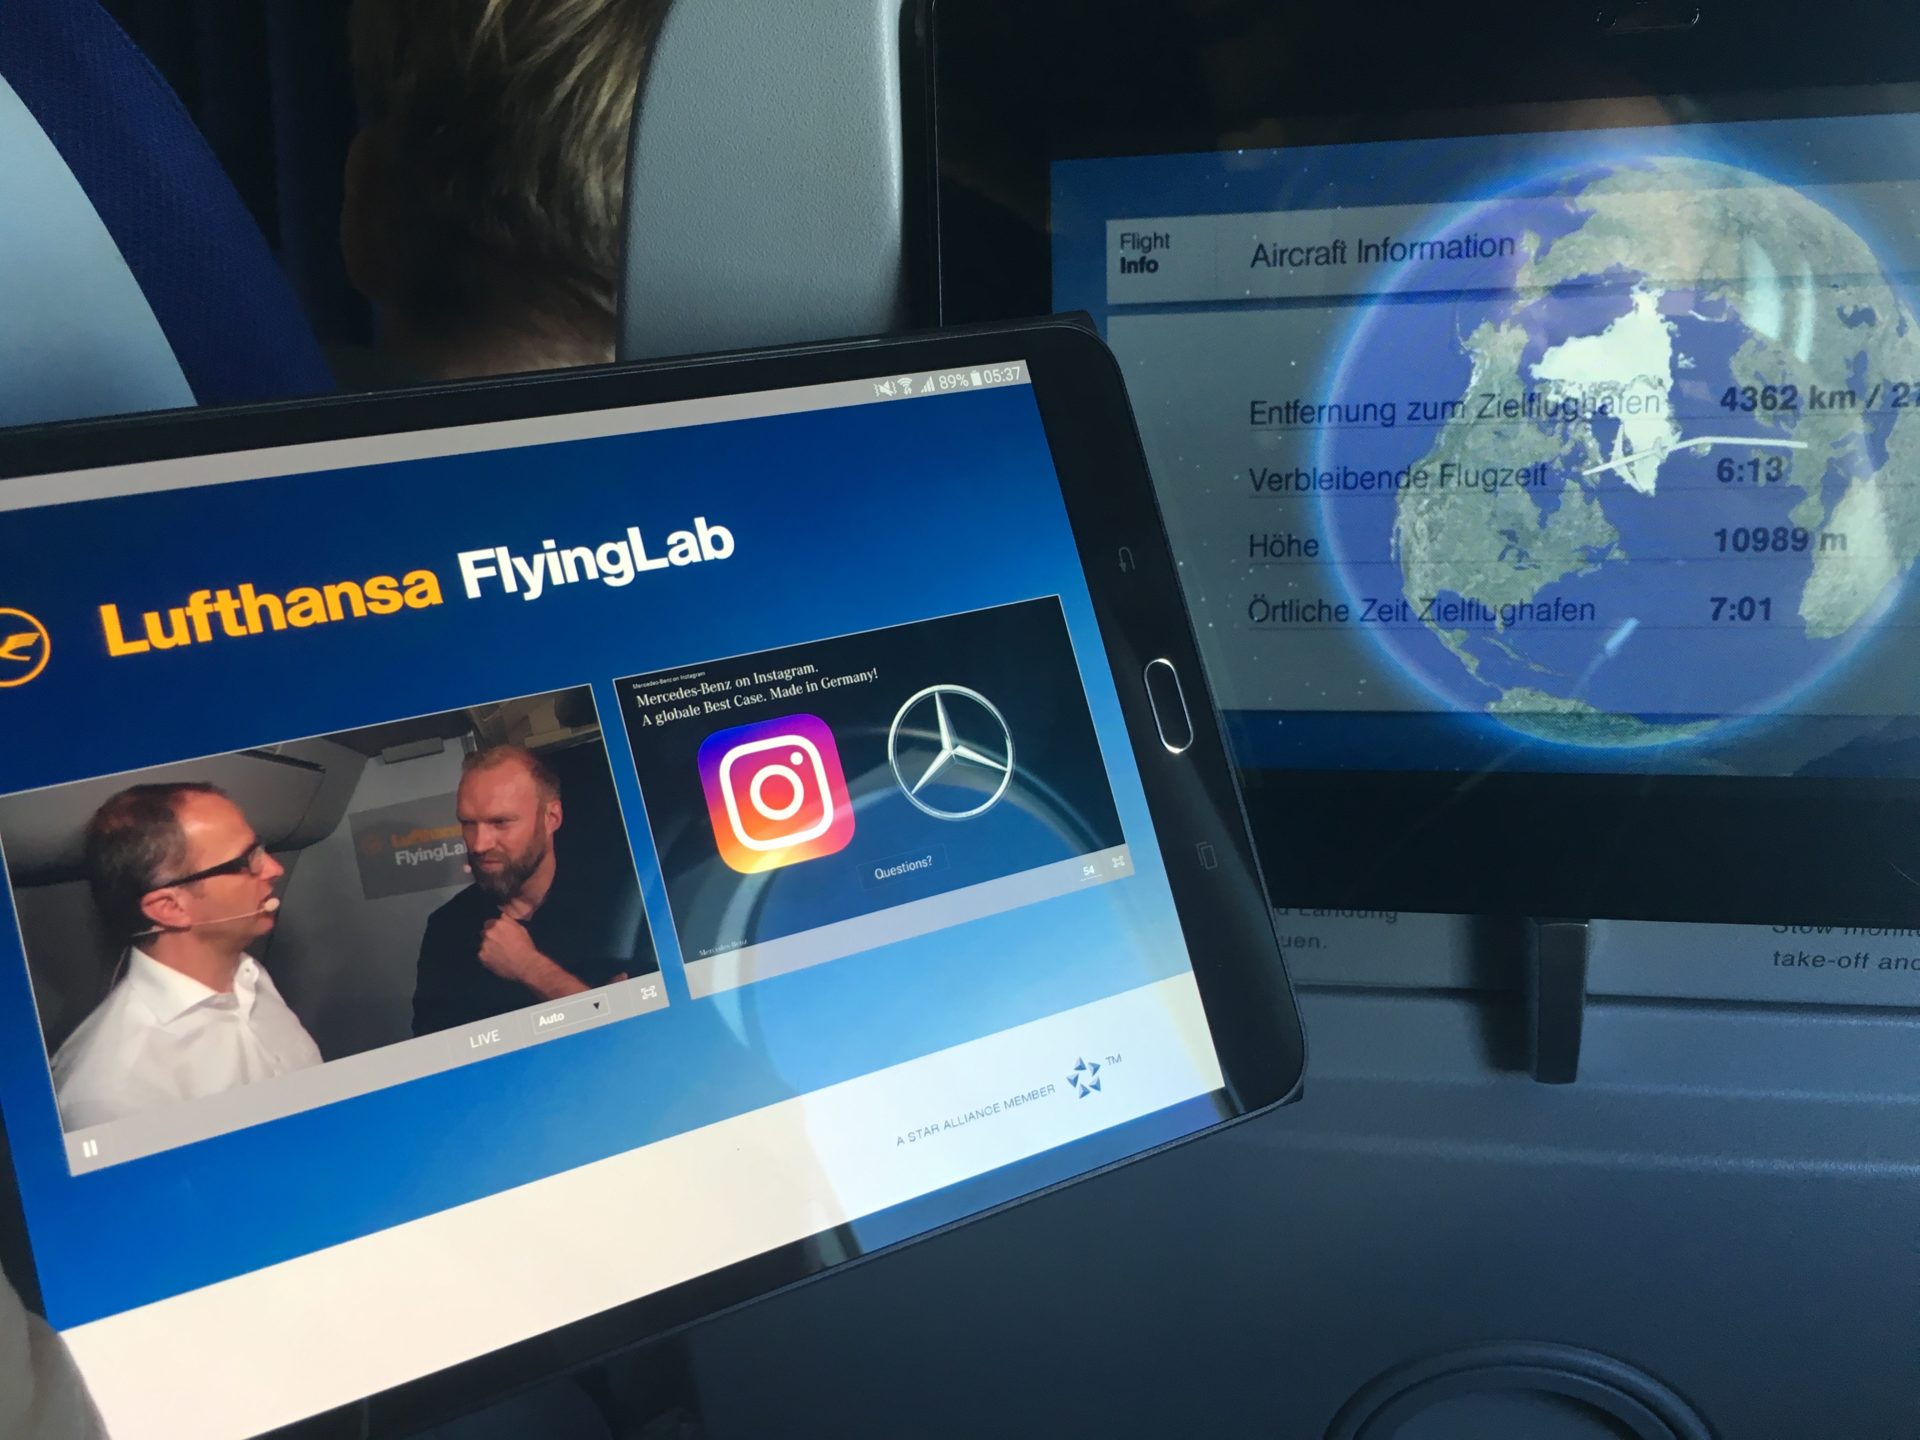 Lufthansa Group - Flying Lab streamed from an airplane